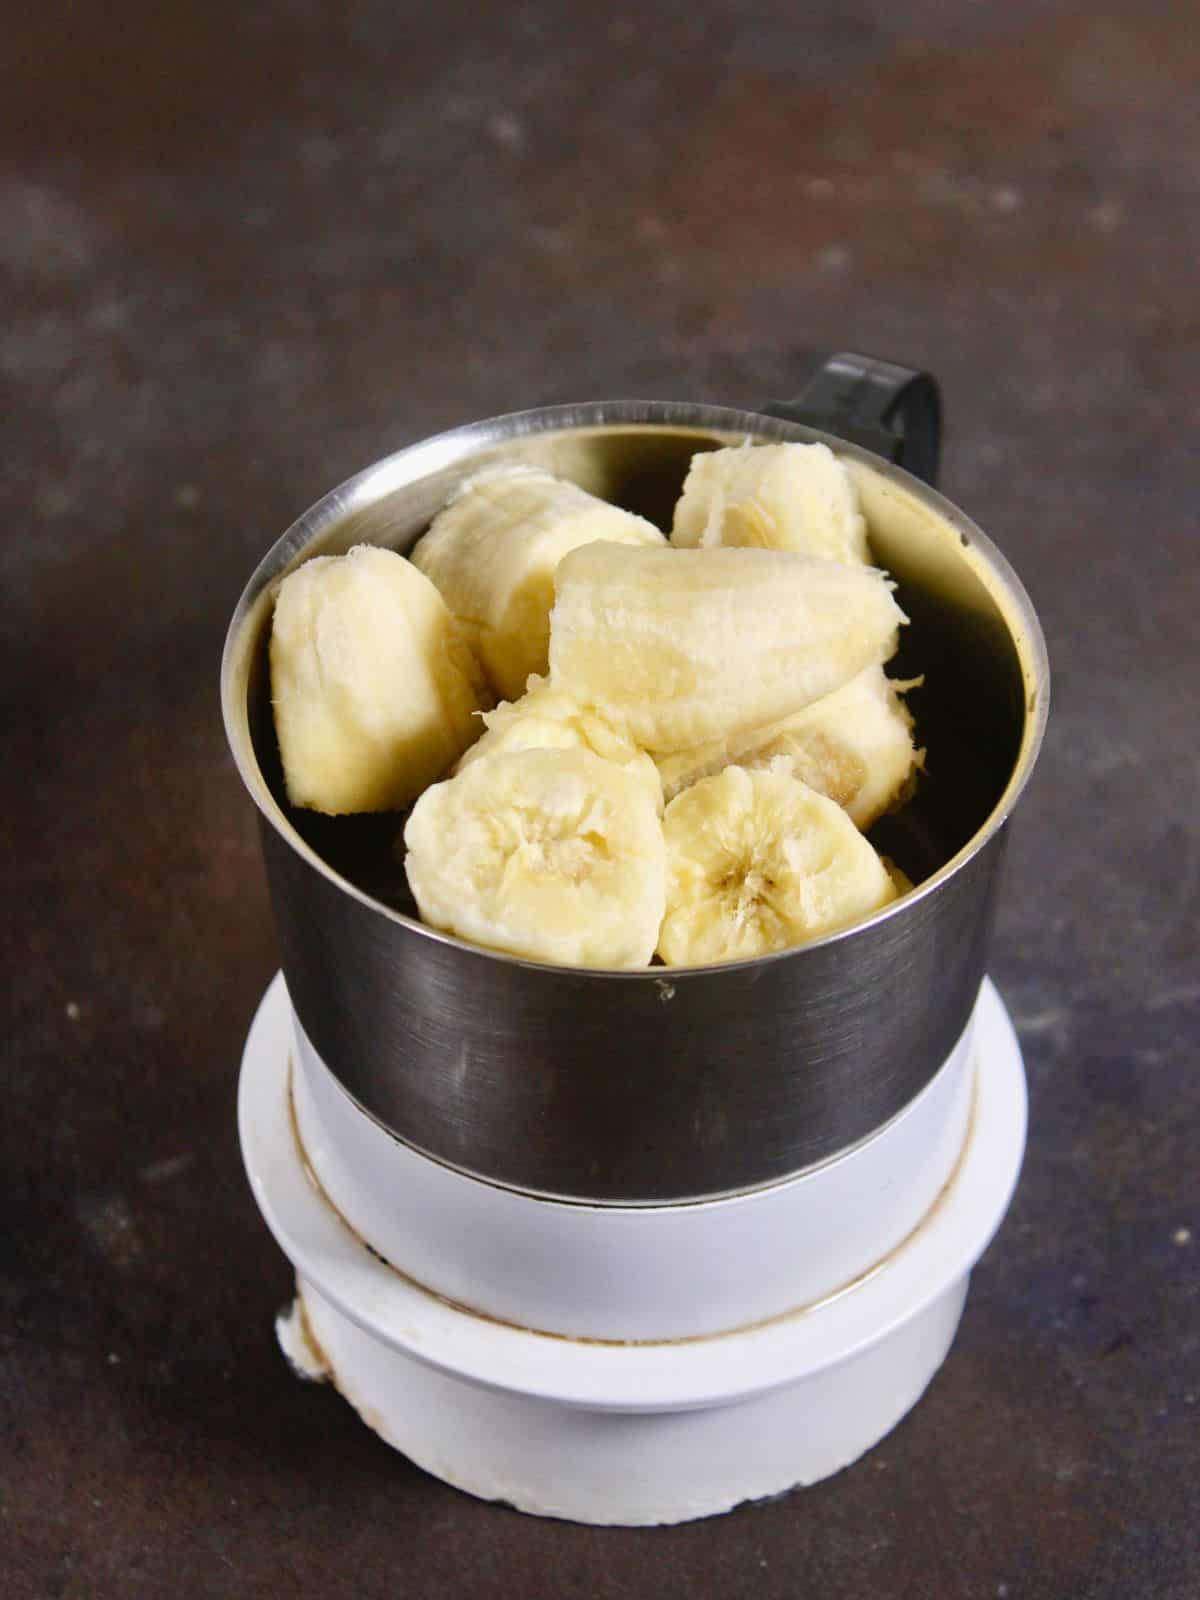 take riped bananas in a blender and blend well